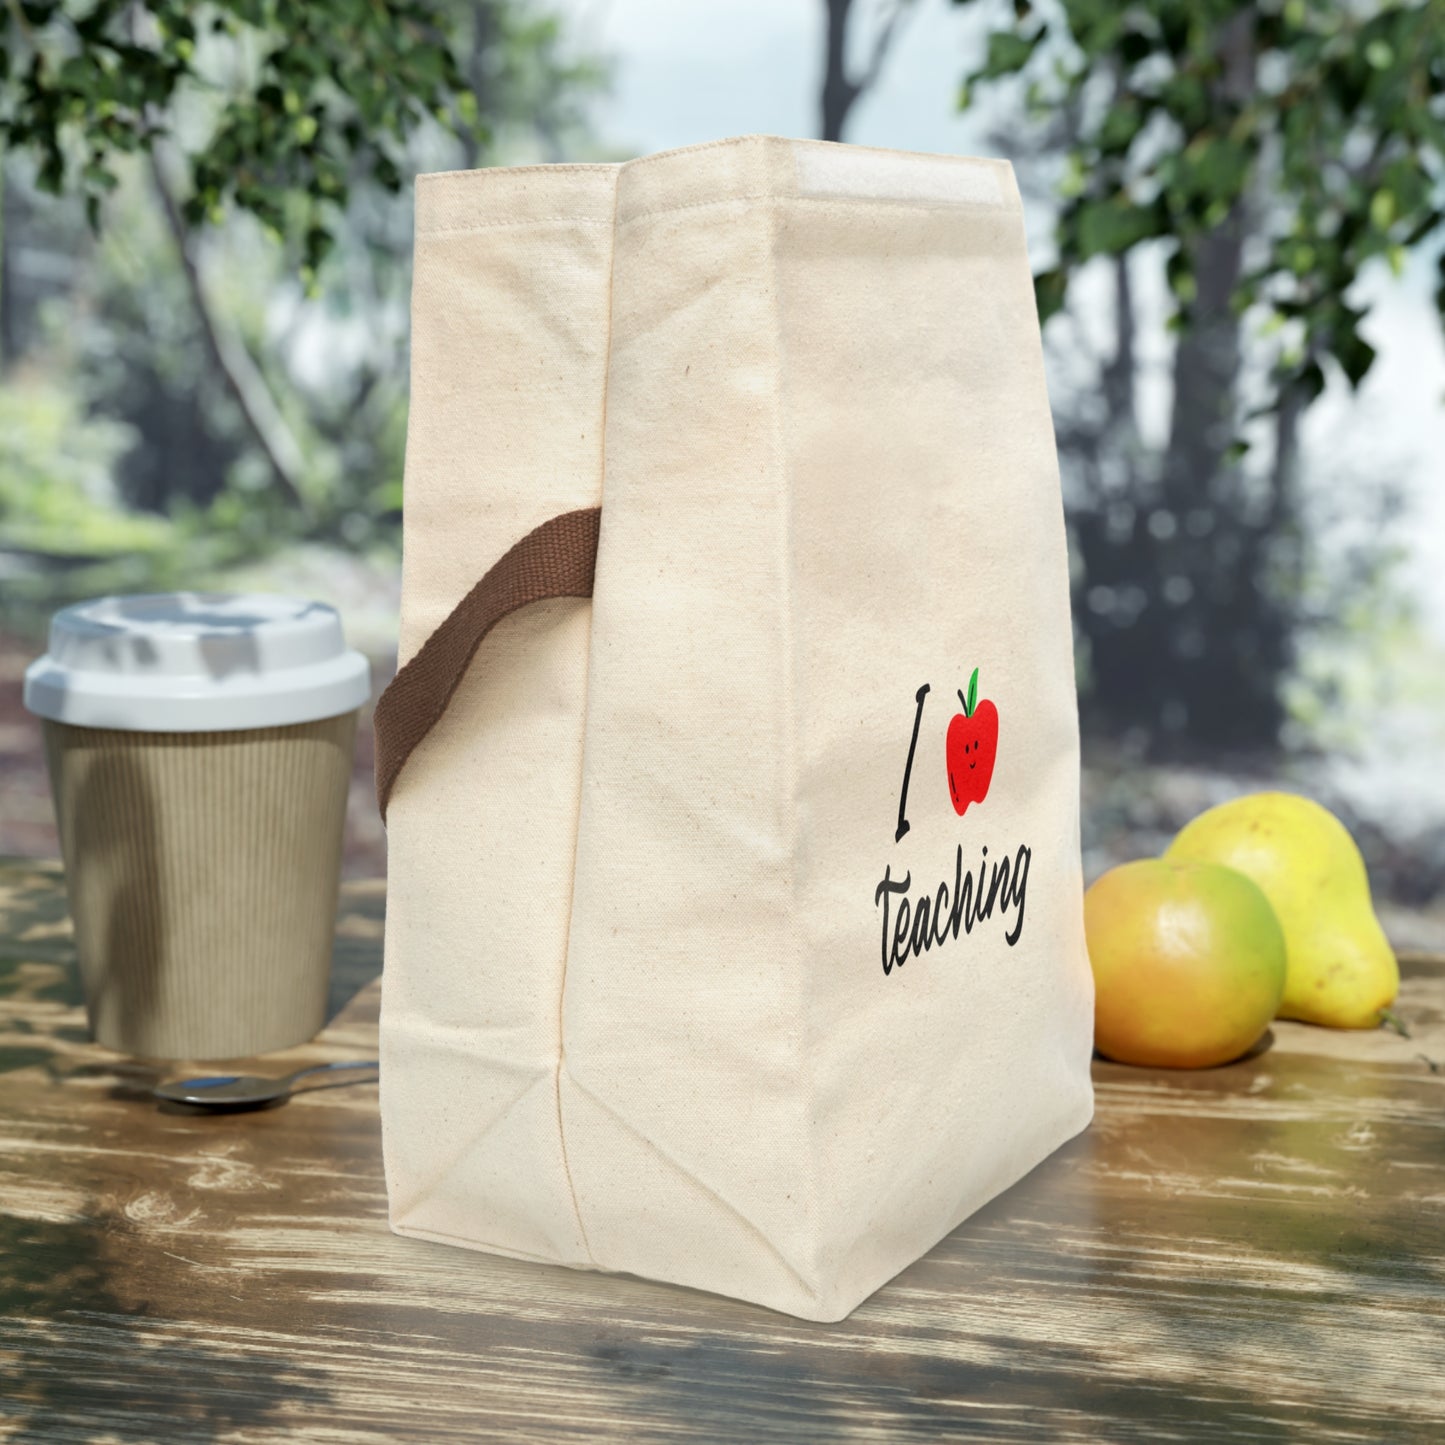 Mock up of side view of open lunch bag sitting on a surface